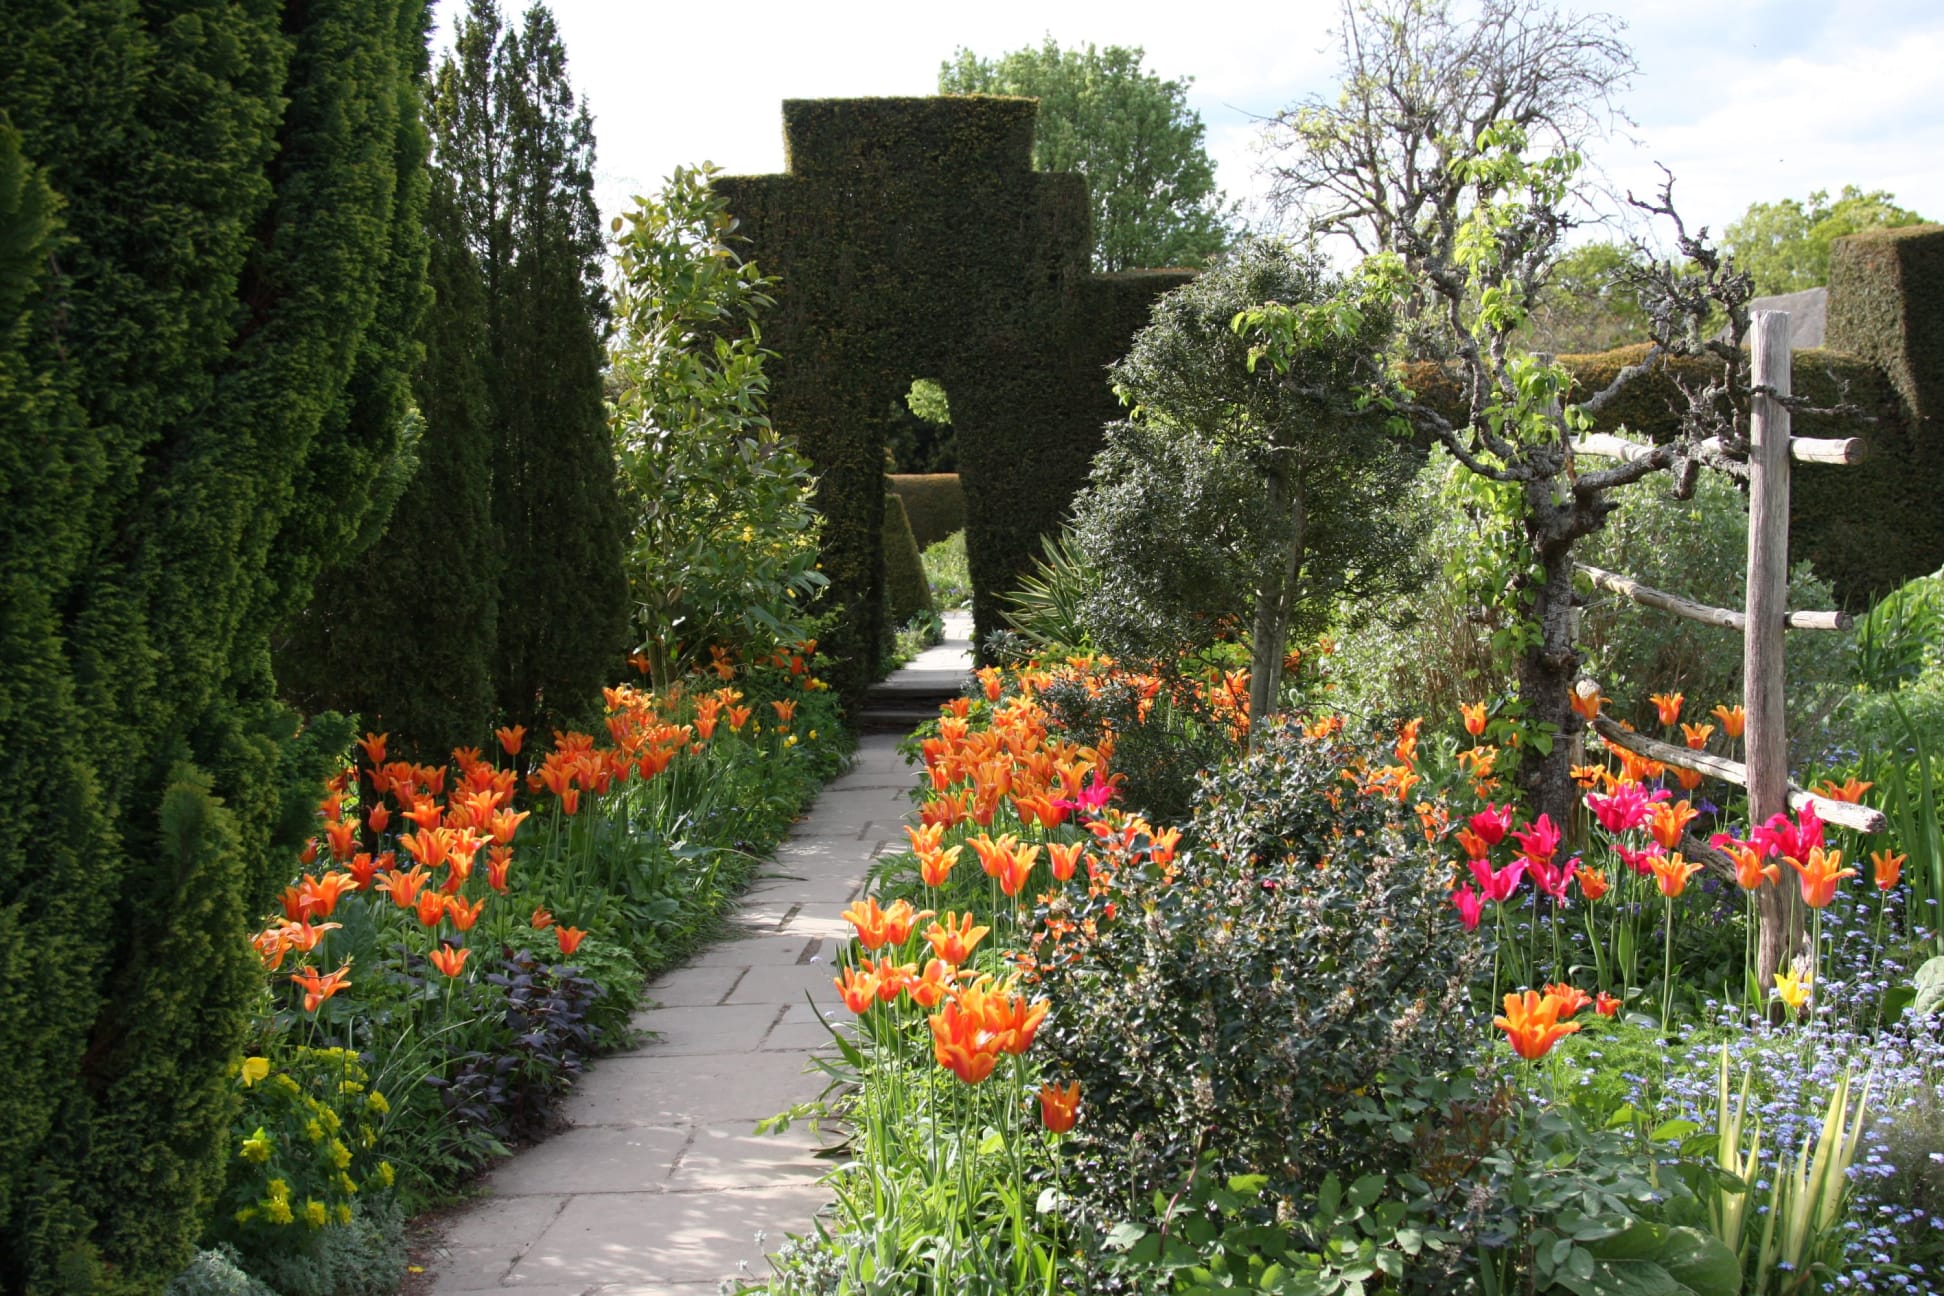 An image of tulips in the High Garden at Great Dixter